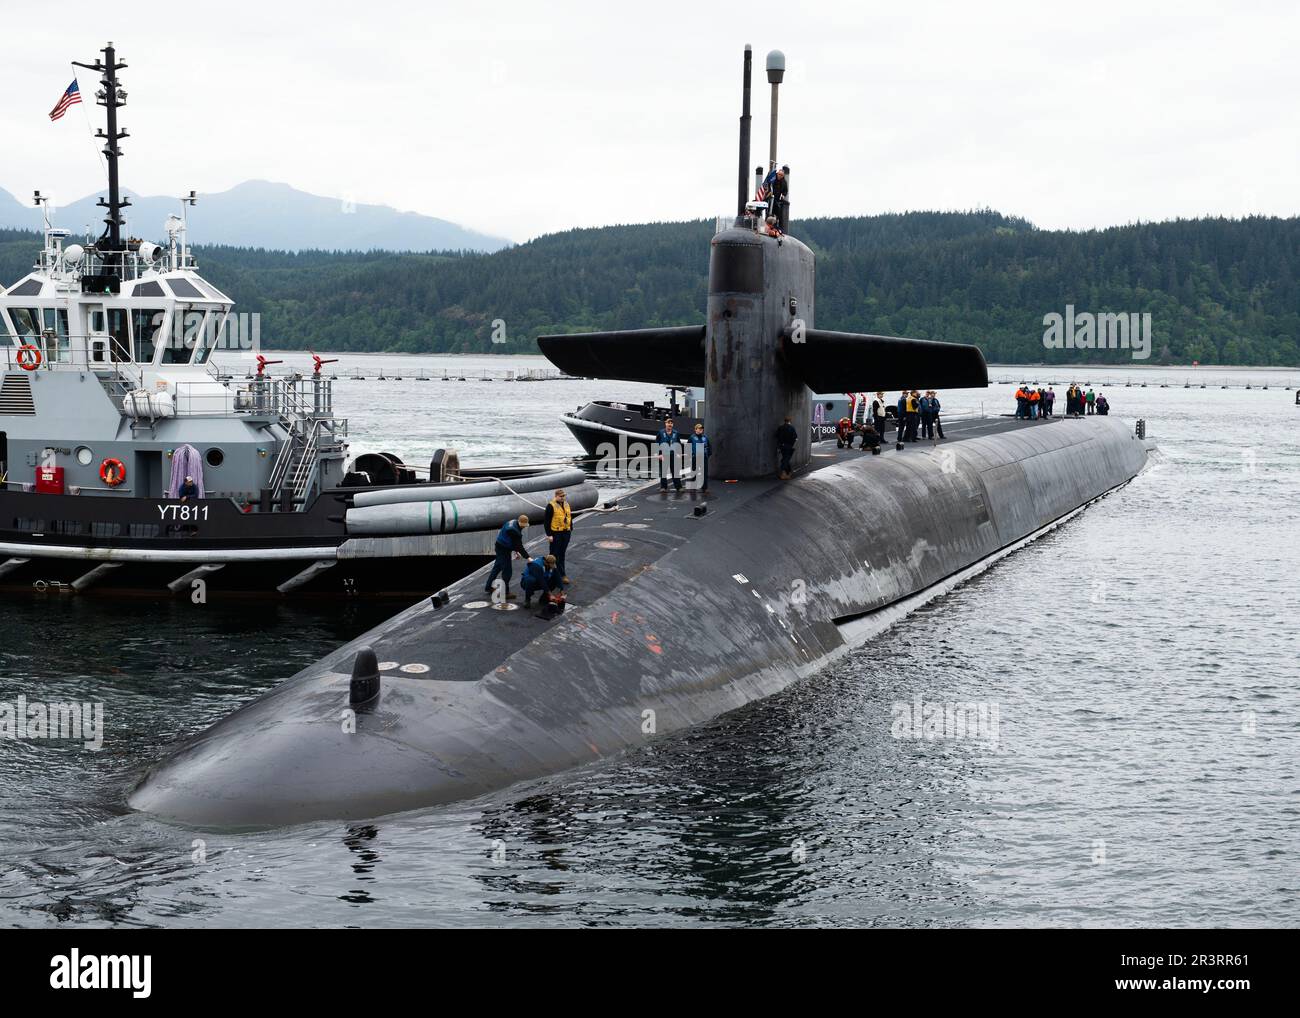 230522-N-ED185-1006  NAVAL BASE KITSAP – BANGOR, Wash. (May 22, 2023) The Ohio-class ballistic missile submarine USS Nevada (SSBN 733) prepares to moor at Naval Base Kitsap – Bangor, Washington, May 22, 2023. Nevada is one of eight ballistic-missile submarines stationed at Naval Base Kitsap-Bangor, providing the most survivable leg of the strategic deterrence triad for the United States. (U.S. Navy photo by Mass Communication Specialist 1st Class Brian G. Reynolds) Stock Photo